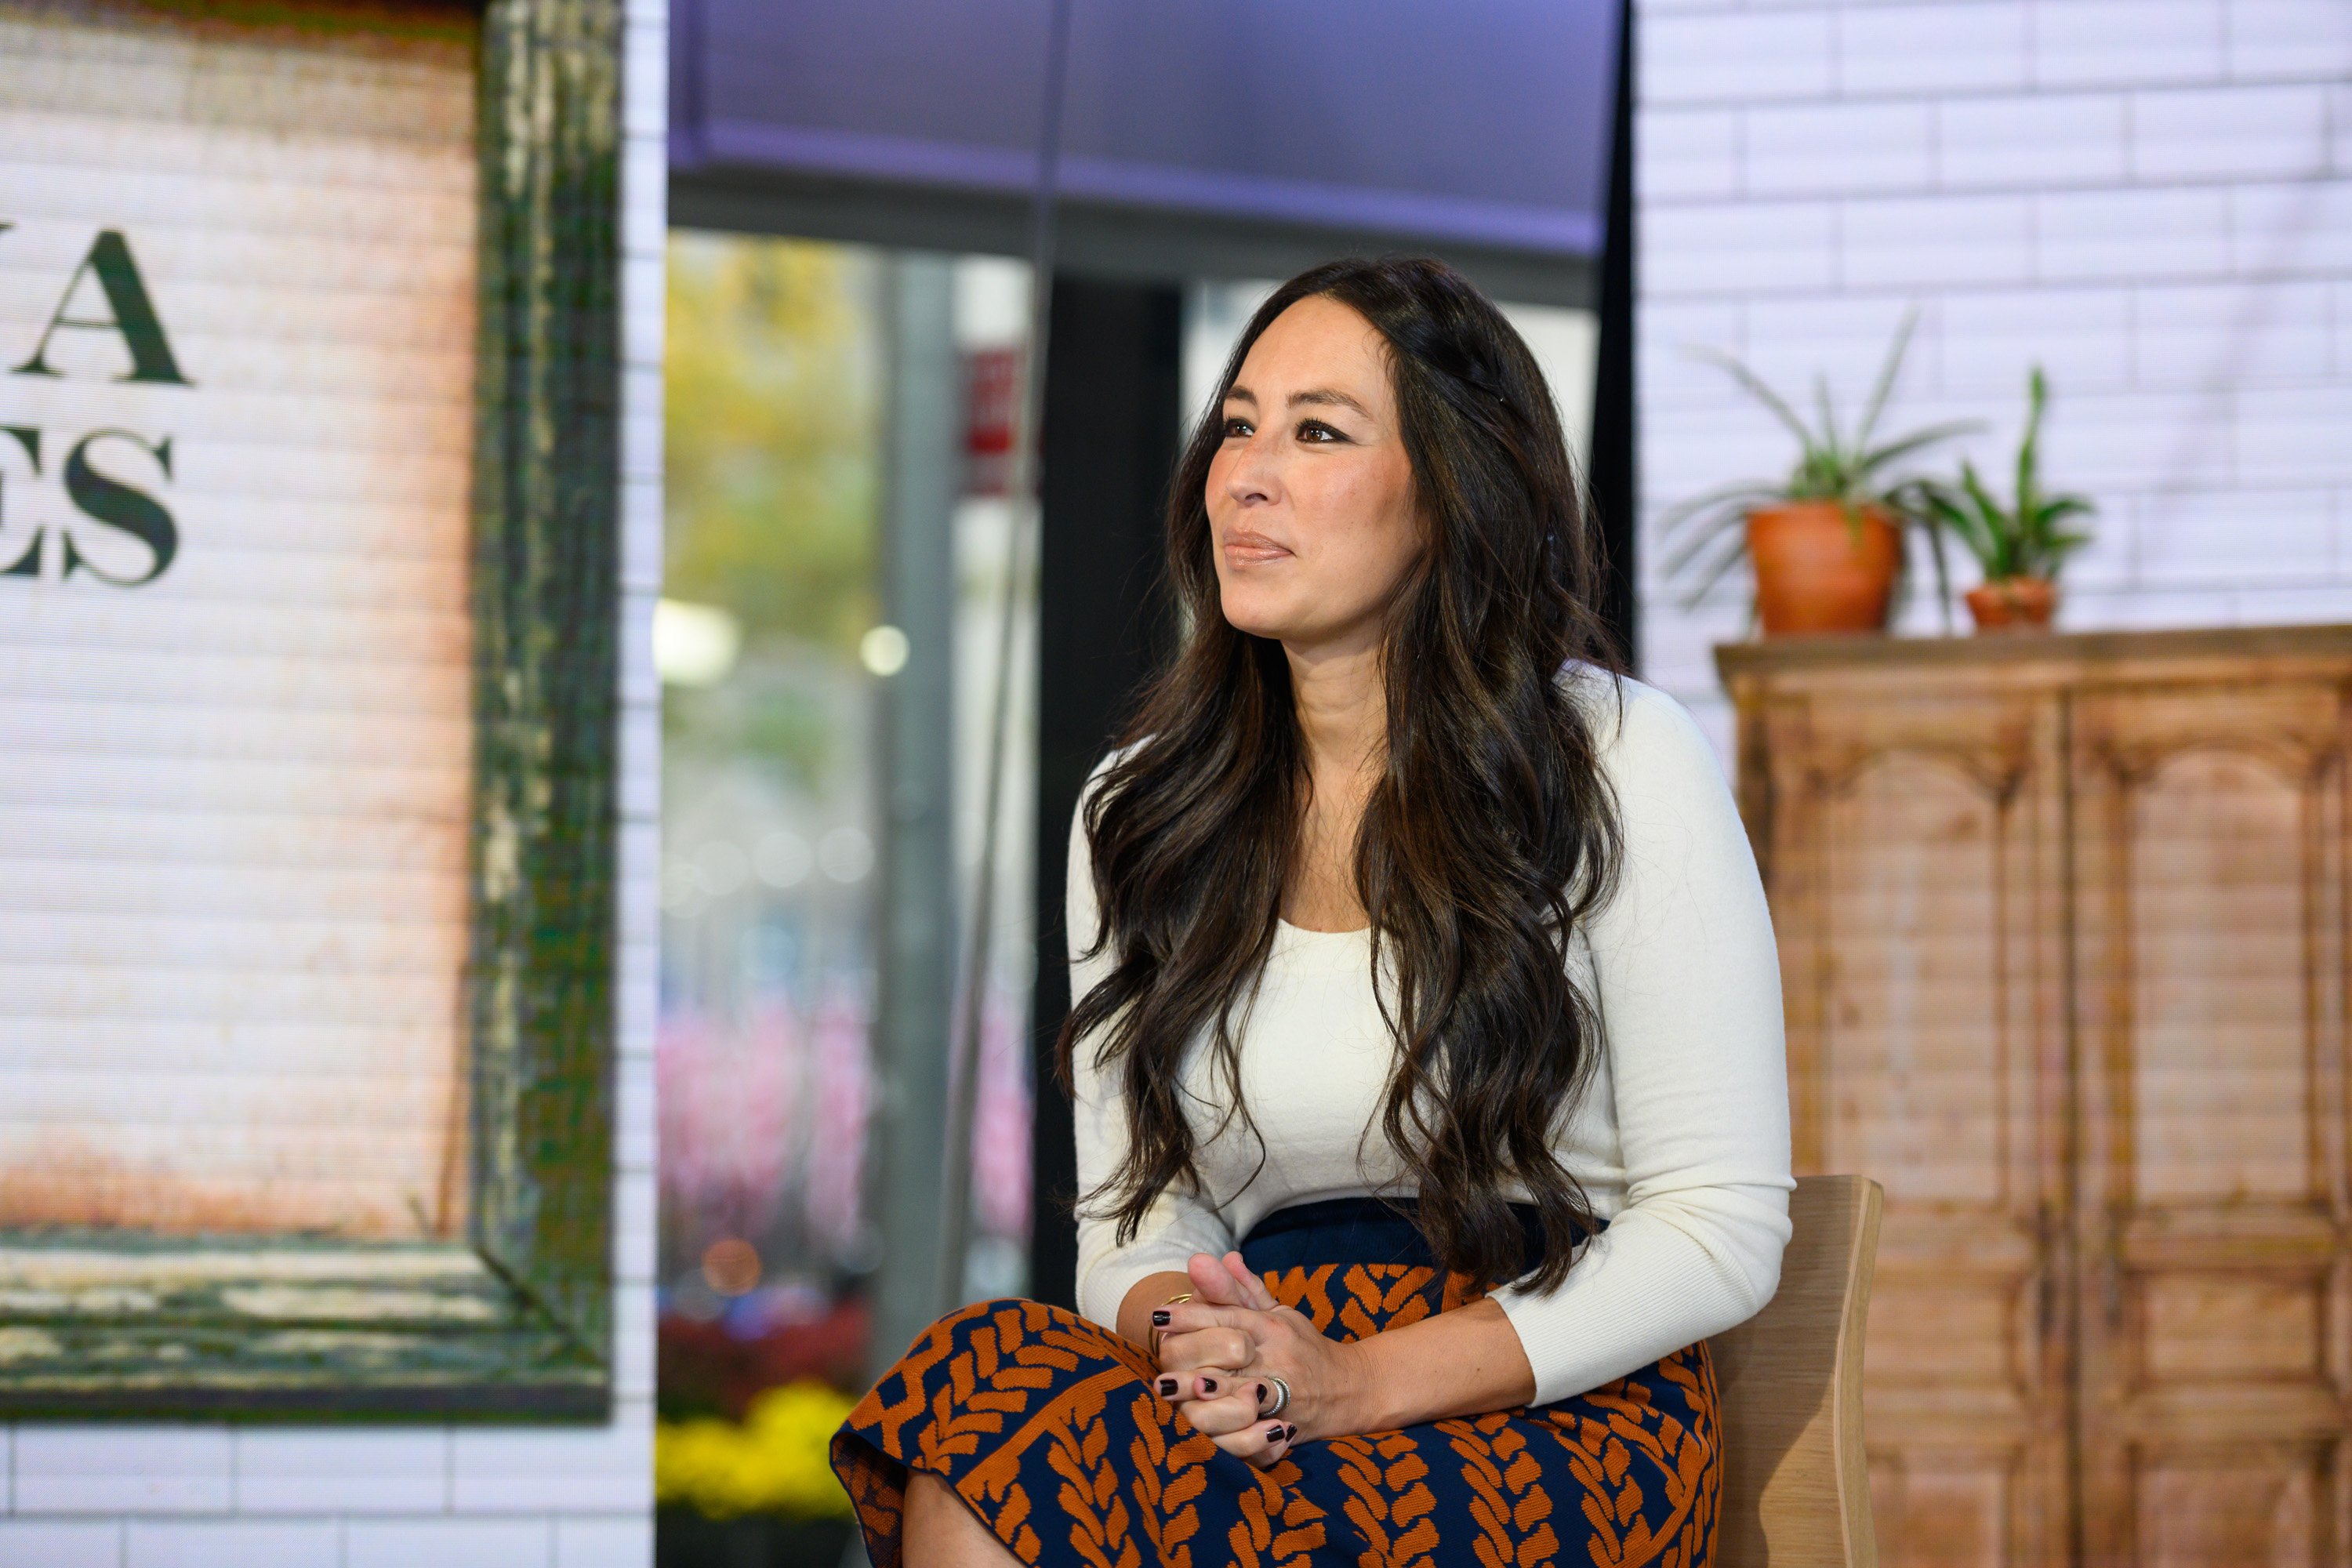 Joanna Gaines | Nathan Congleton/NBCU Photo Bank/NBCUniversal via Getty Images via Getty Images